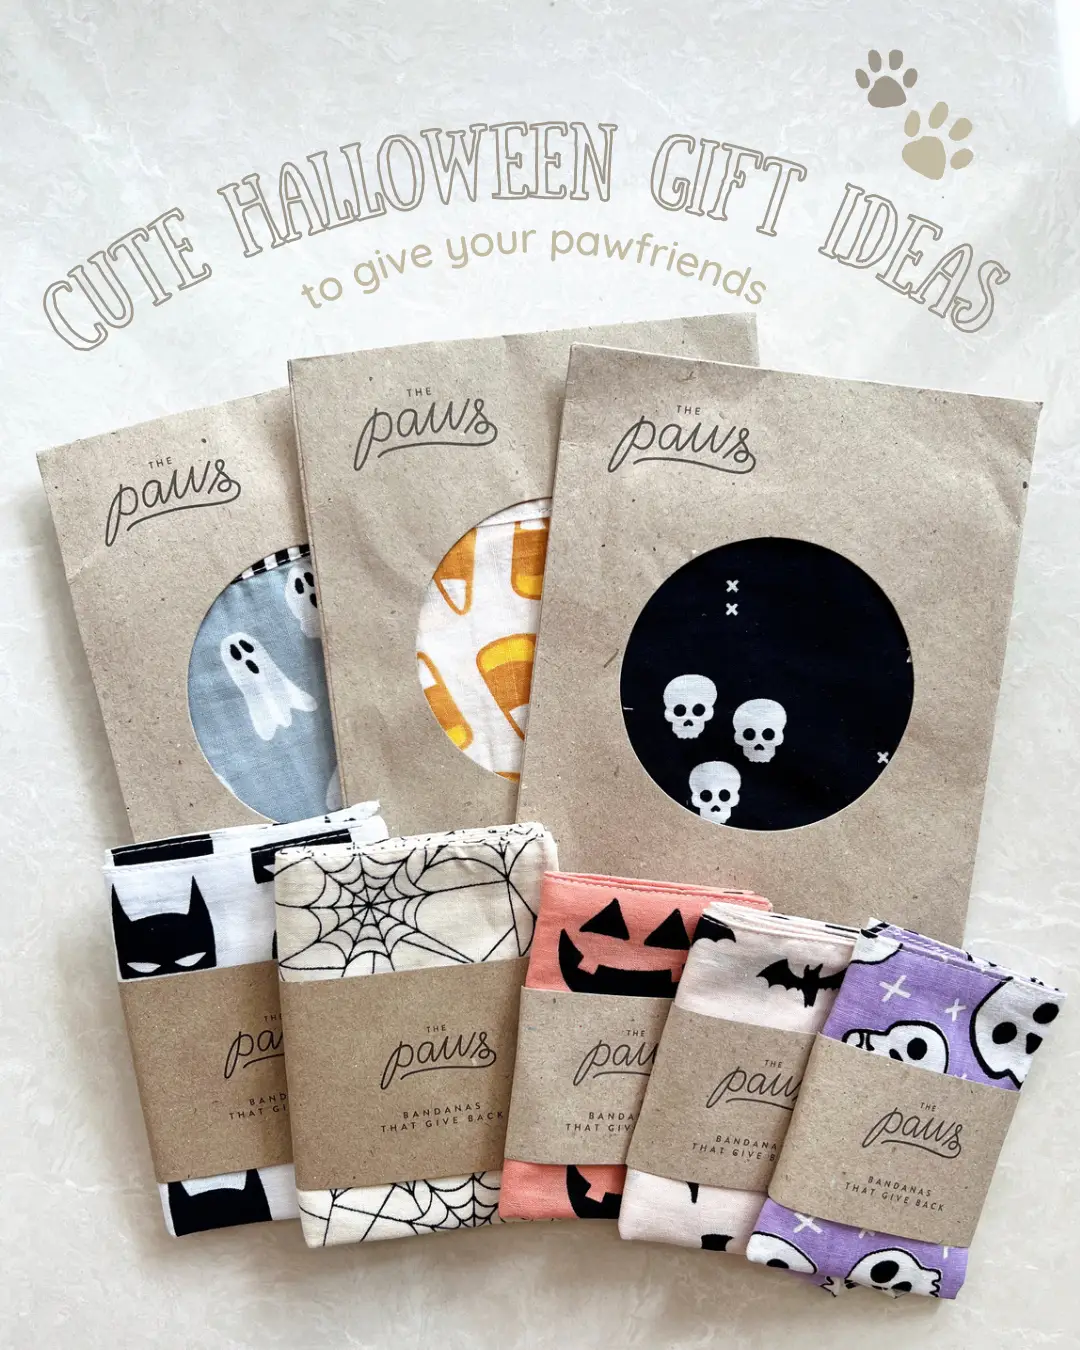 Cute Halloween Gift Ideas for your pawfriends 🎃's images(0)